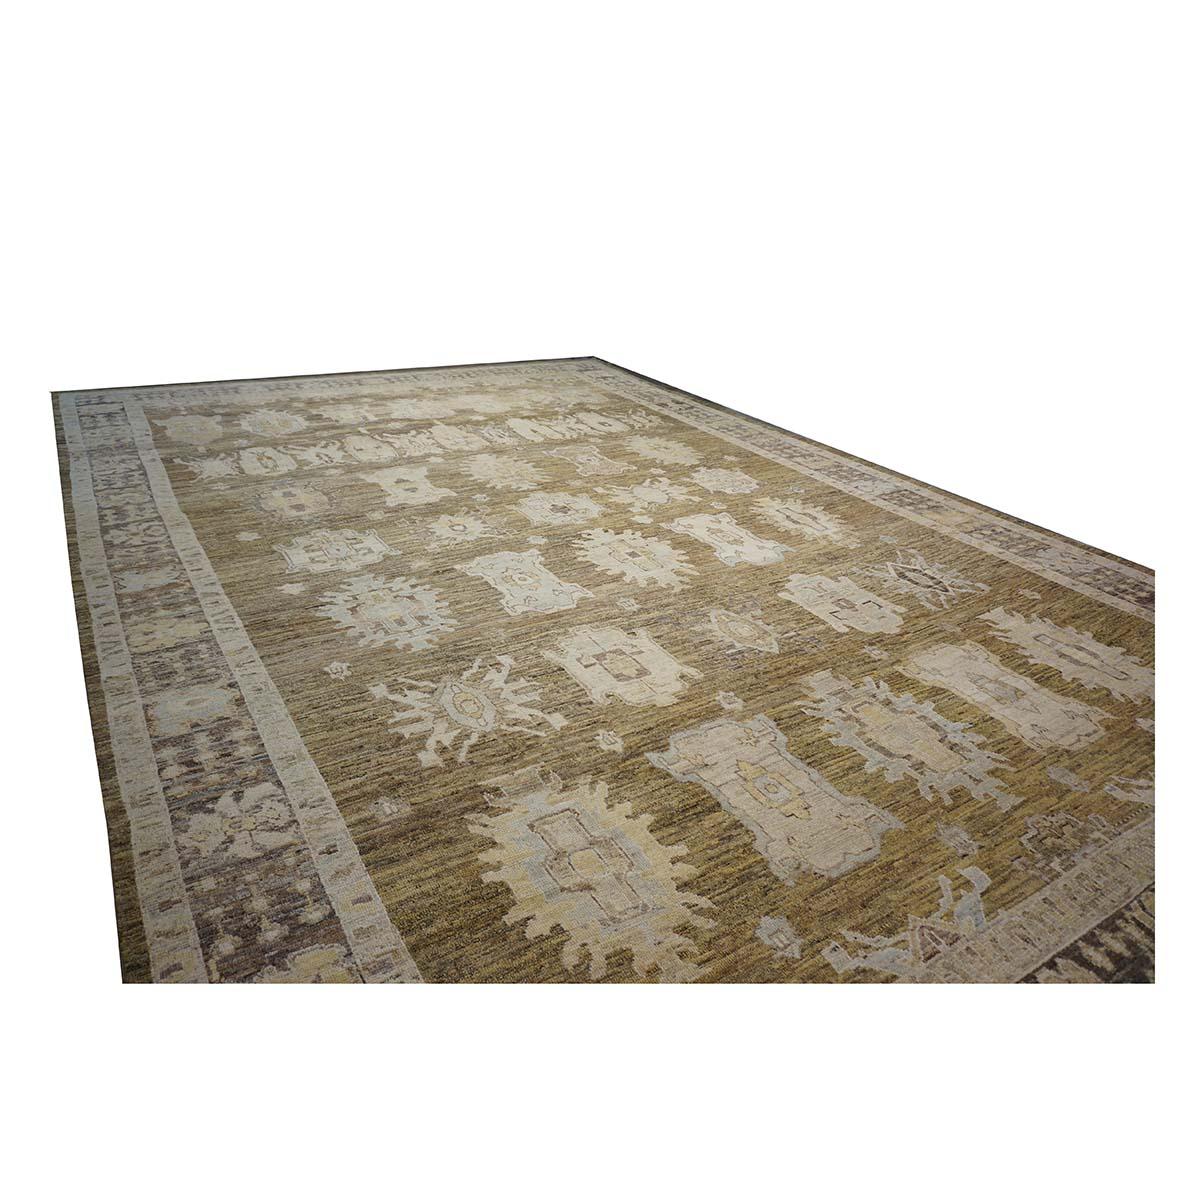 21st Century Turkish Oushak 15x23 Brown, Charcoal & Ivory Handmade Oversized Rug For Sale 1